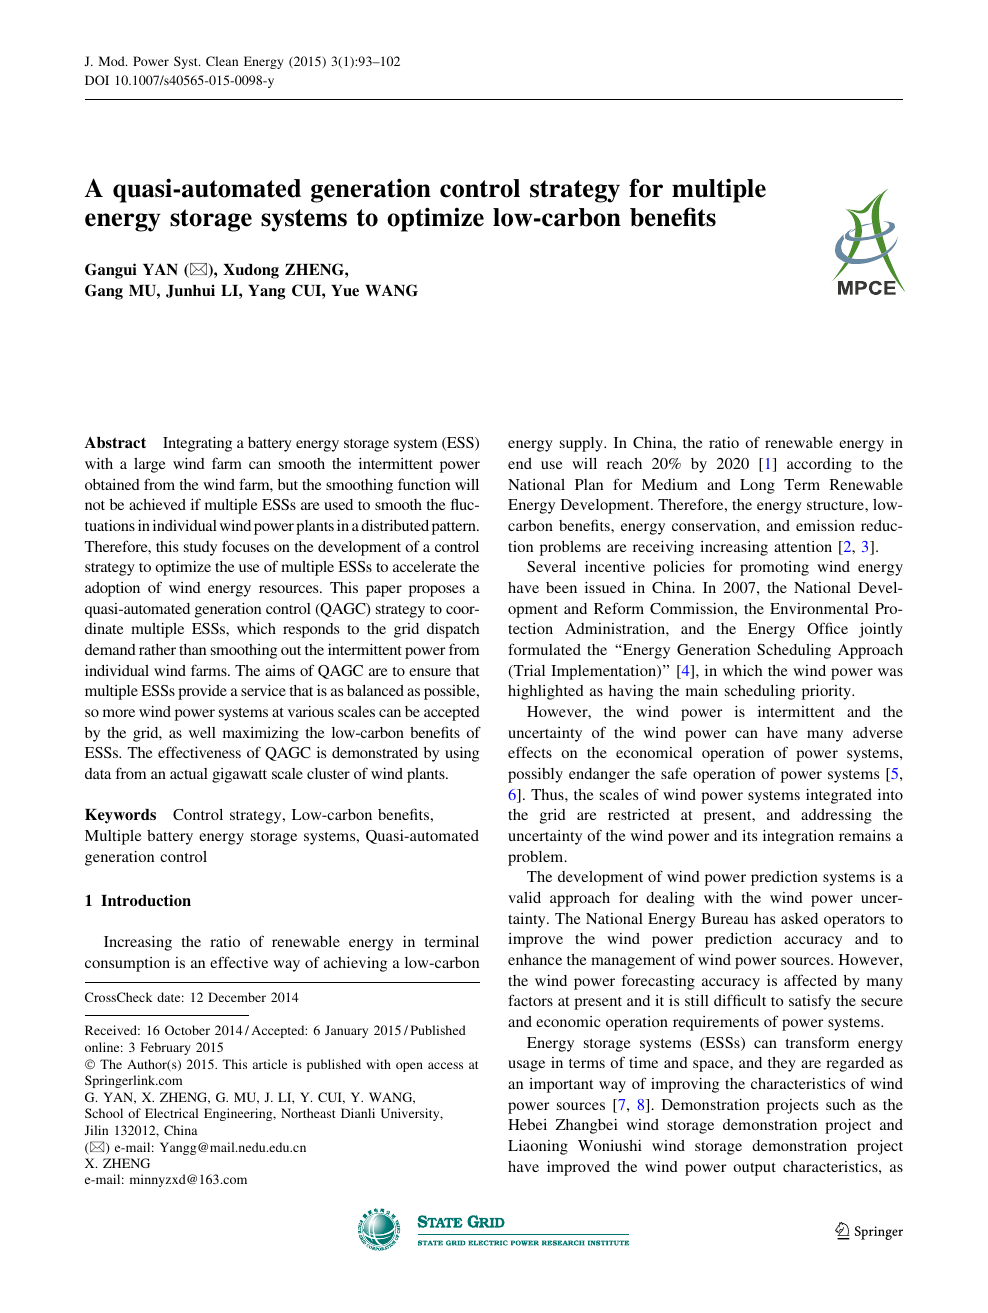 A Quasi Automated Generation Control Strategy For Multiple Energy Storage Systems To Optimize Low Carbon Benefits Topic Of Research Paper In Electrical Engineering Electronic Engineering Information Engineering Download Scholarly Article Pdf And Read